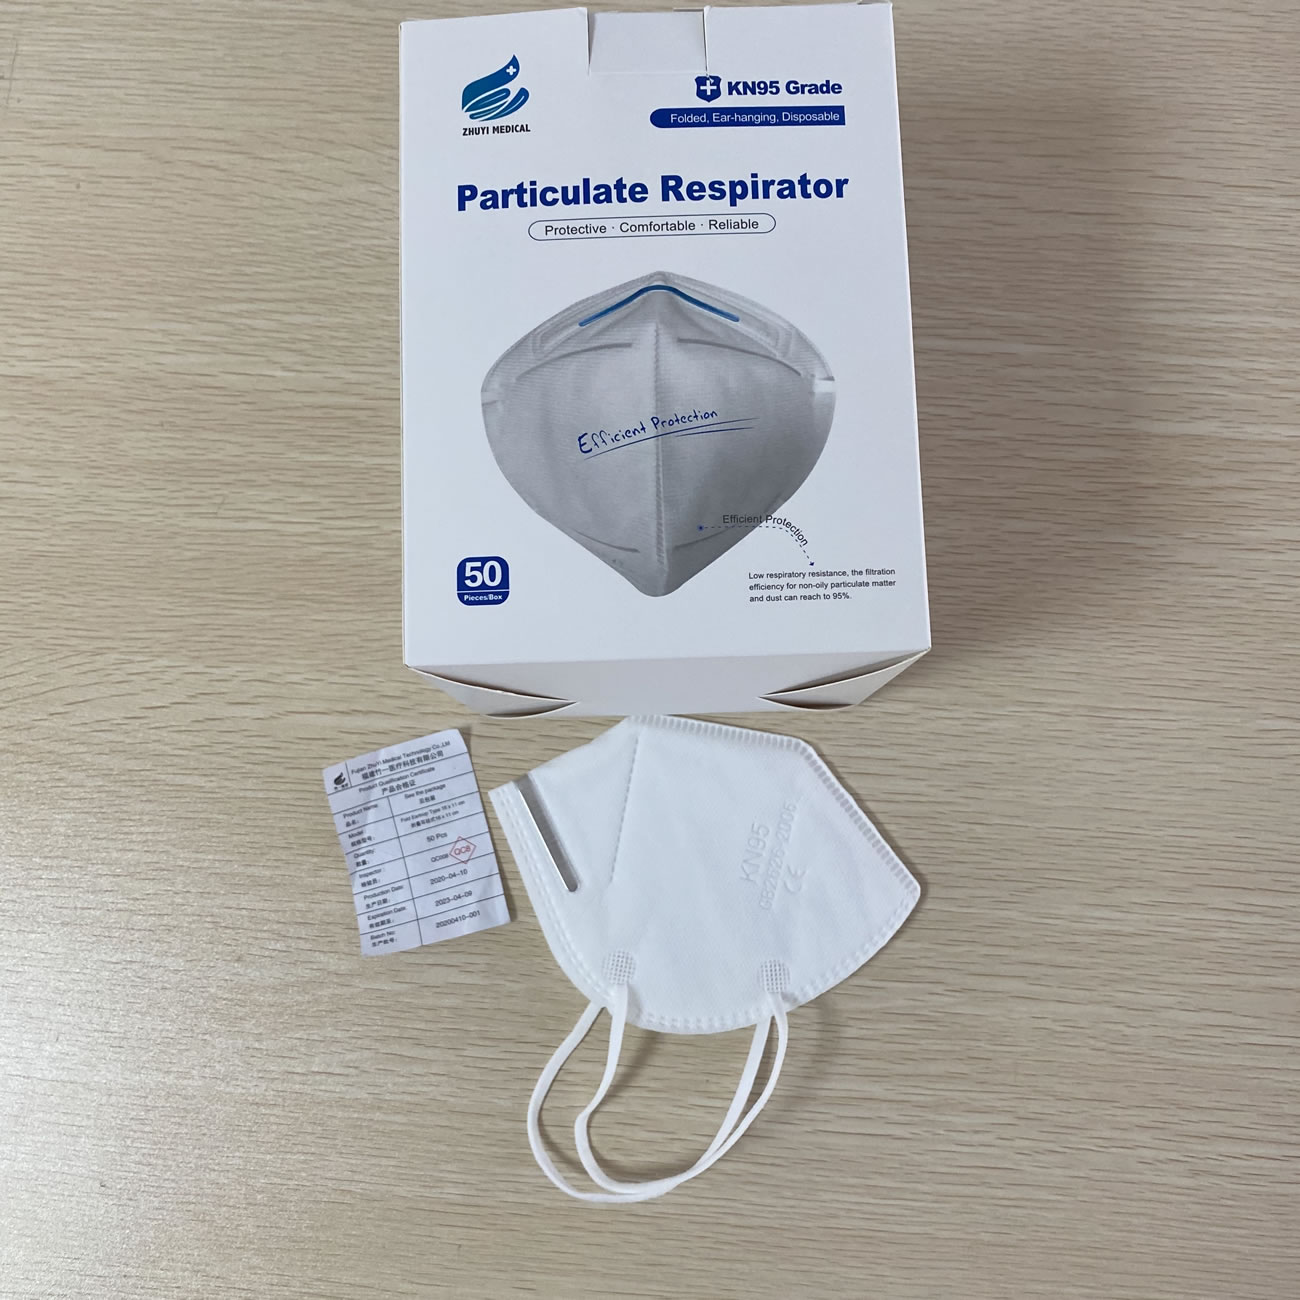 FFP2 Mask Cover KN95 Grade In Chinese Particulate Respirator 50Pieces/Box Model Z9501